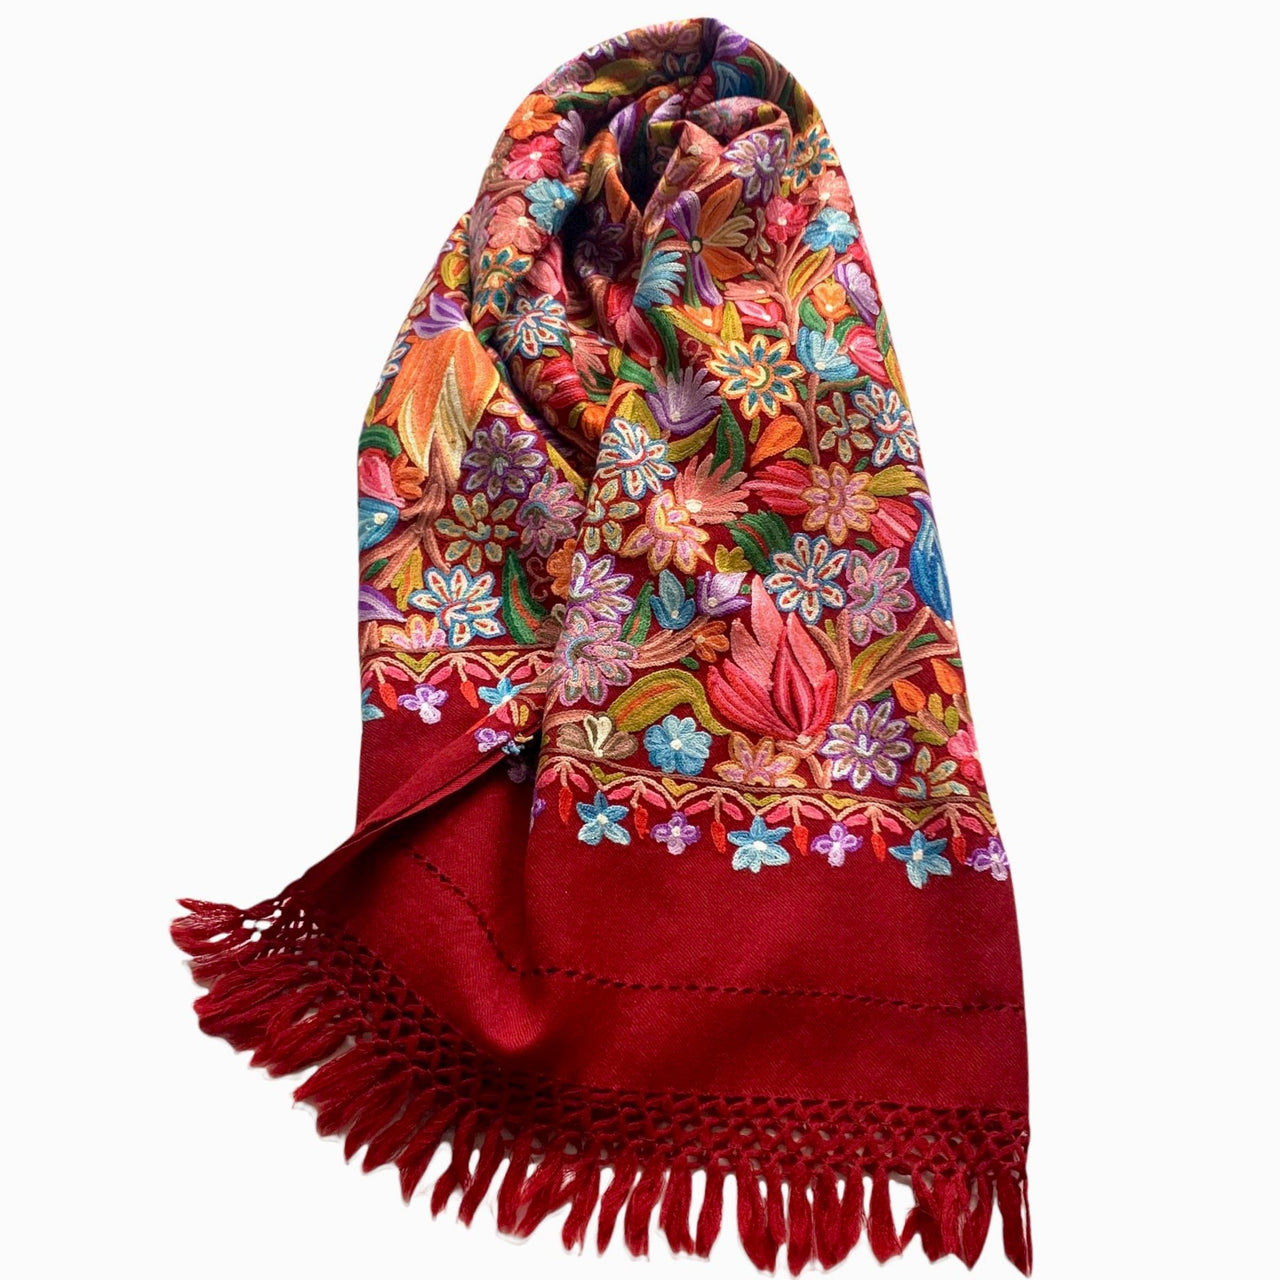 Handmade  Burgundy Floral Shawl  Wool Scarf Wrap Hand Embroidered Stole